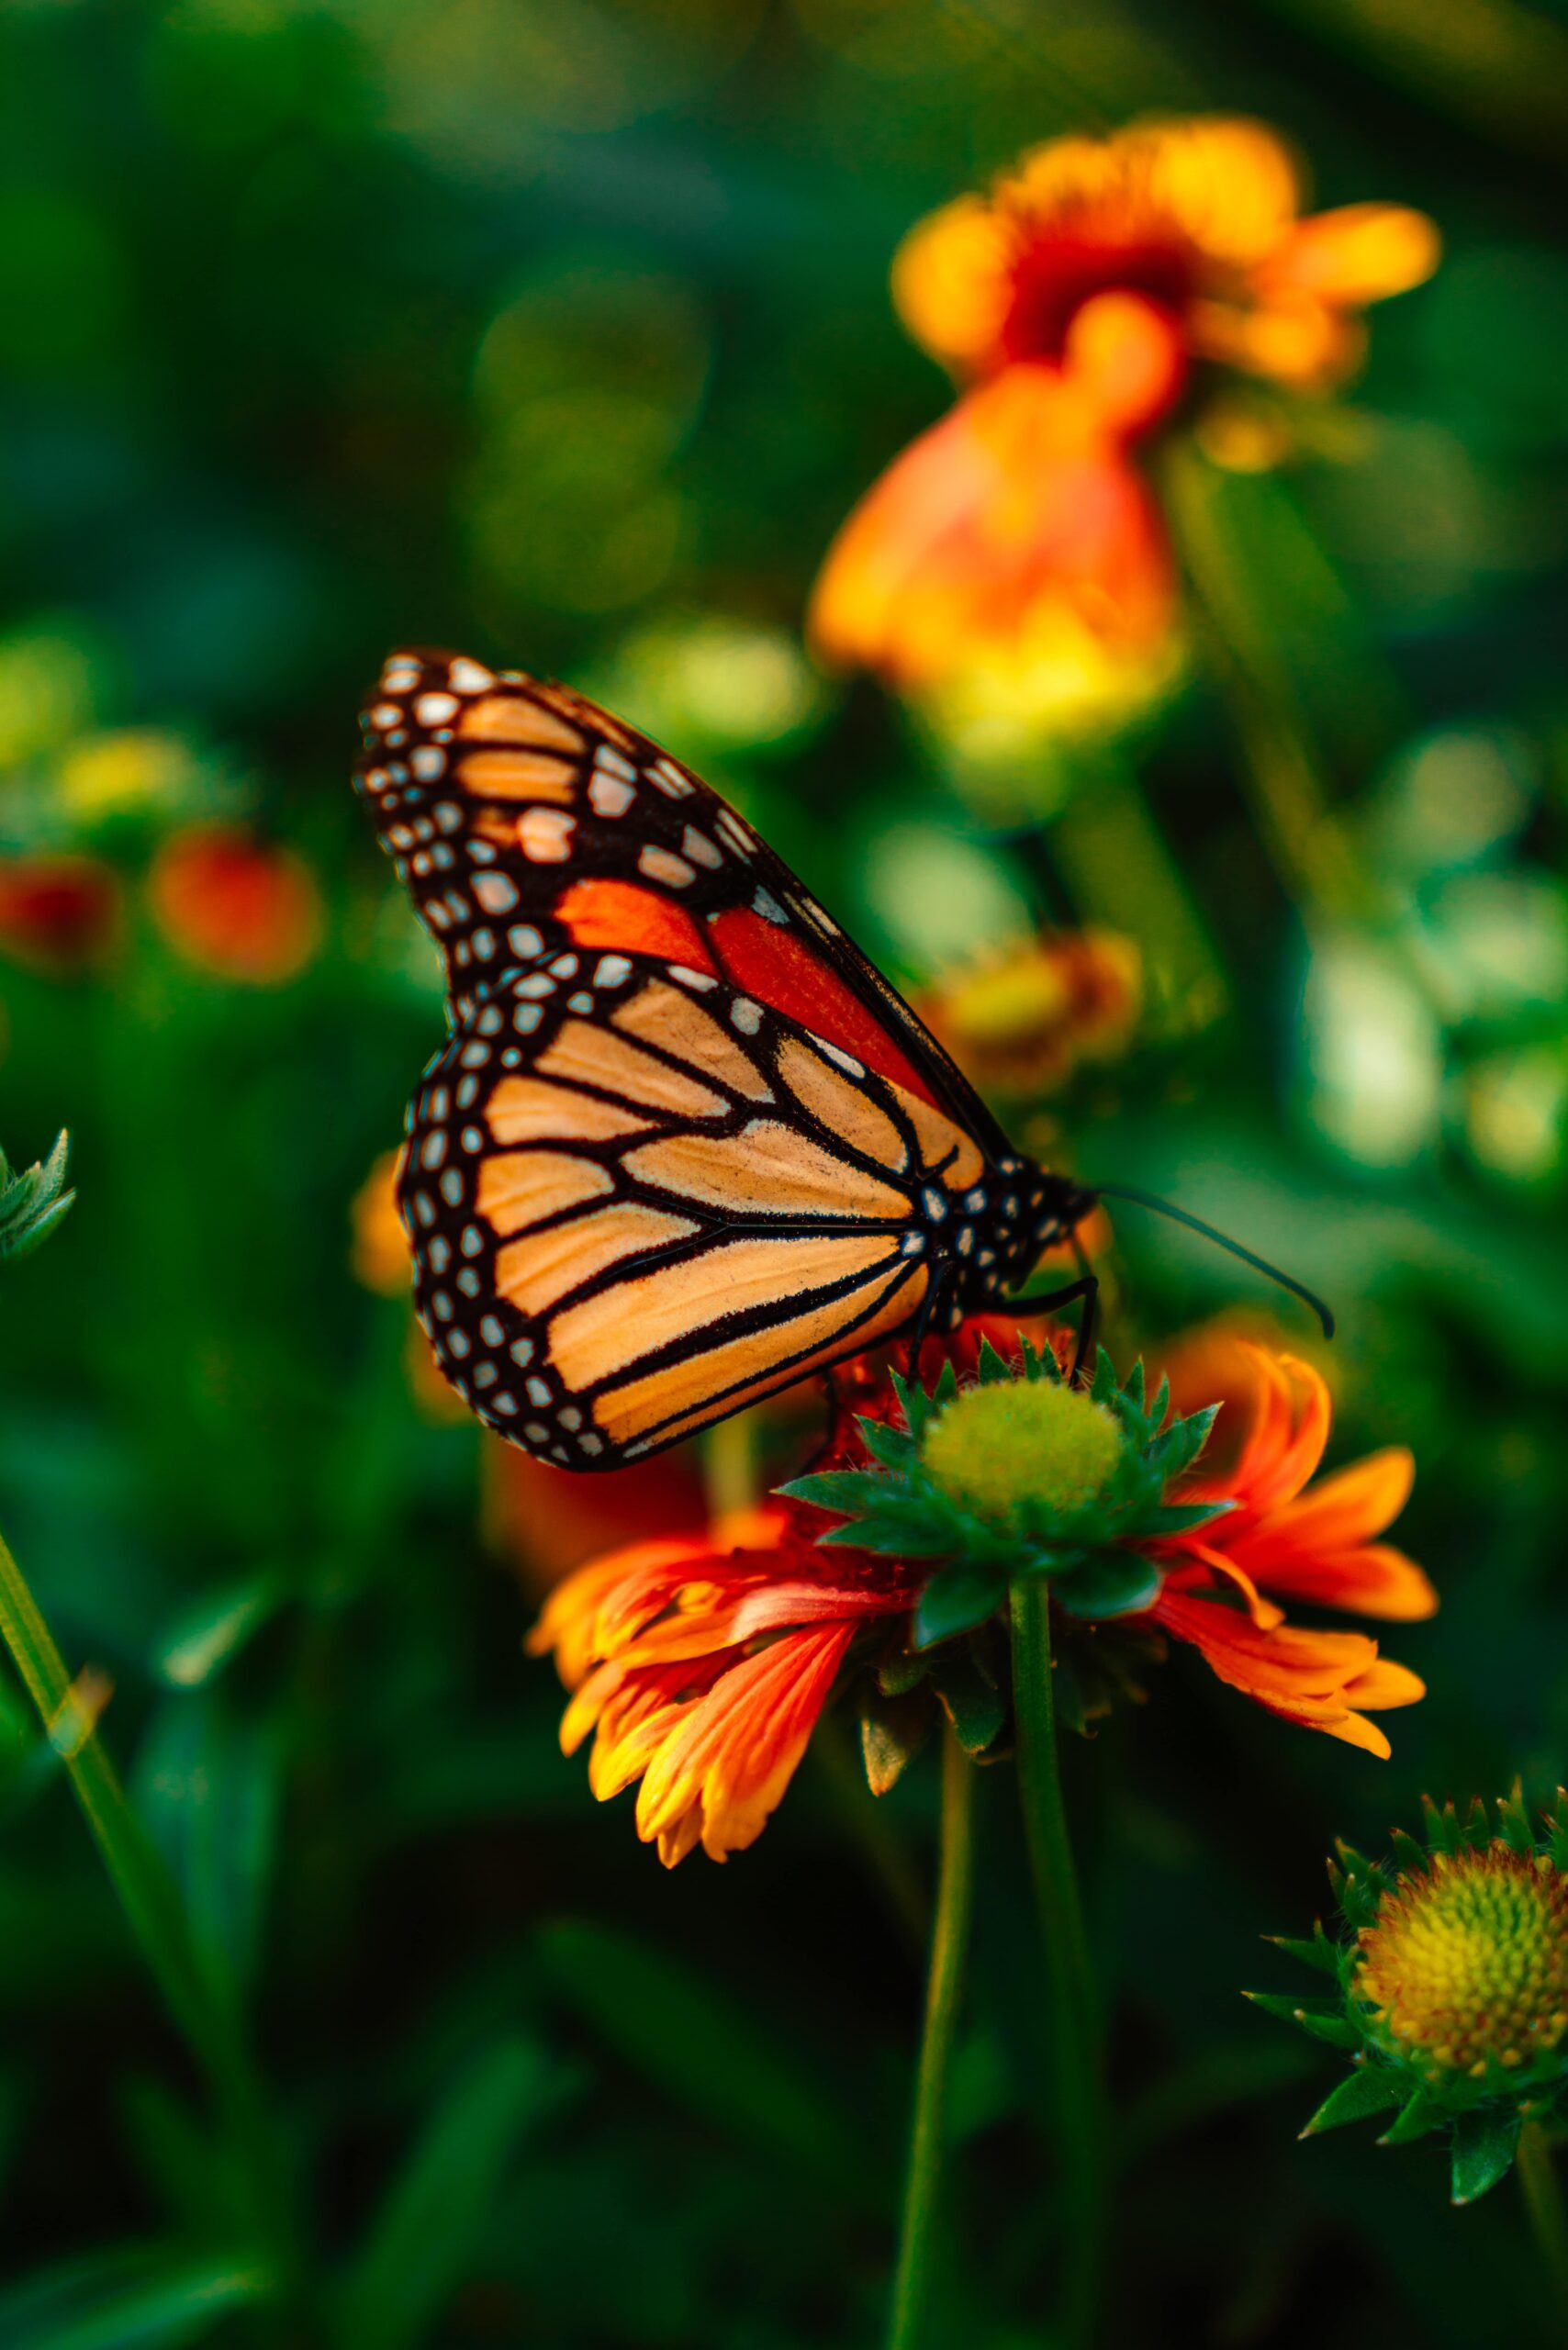 An image of a beautiful butterfly sitting on a flower.